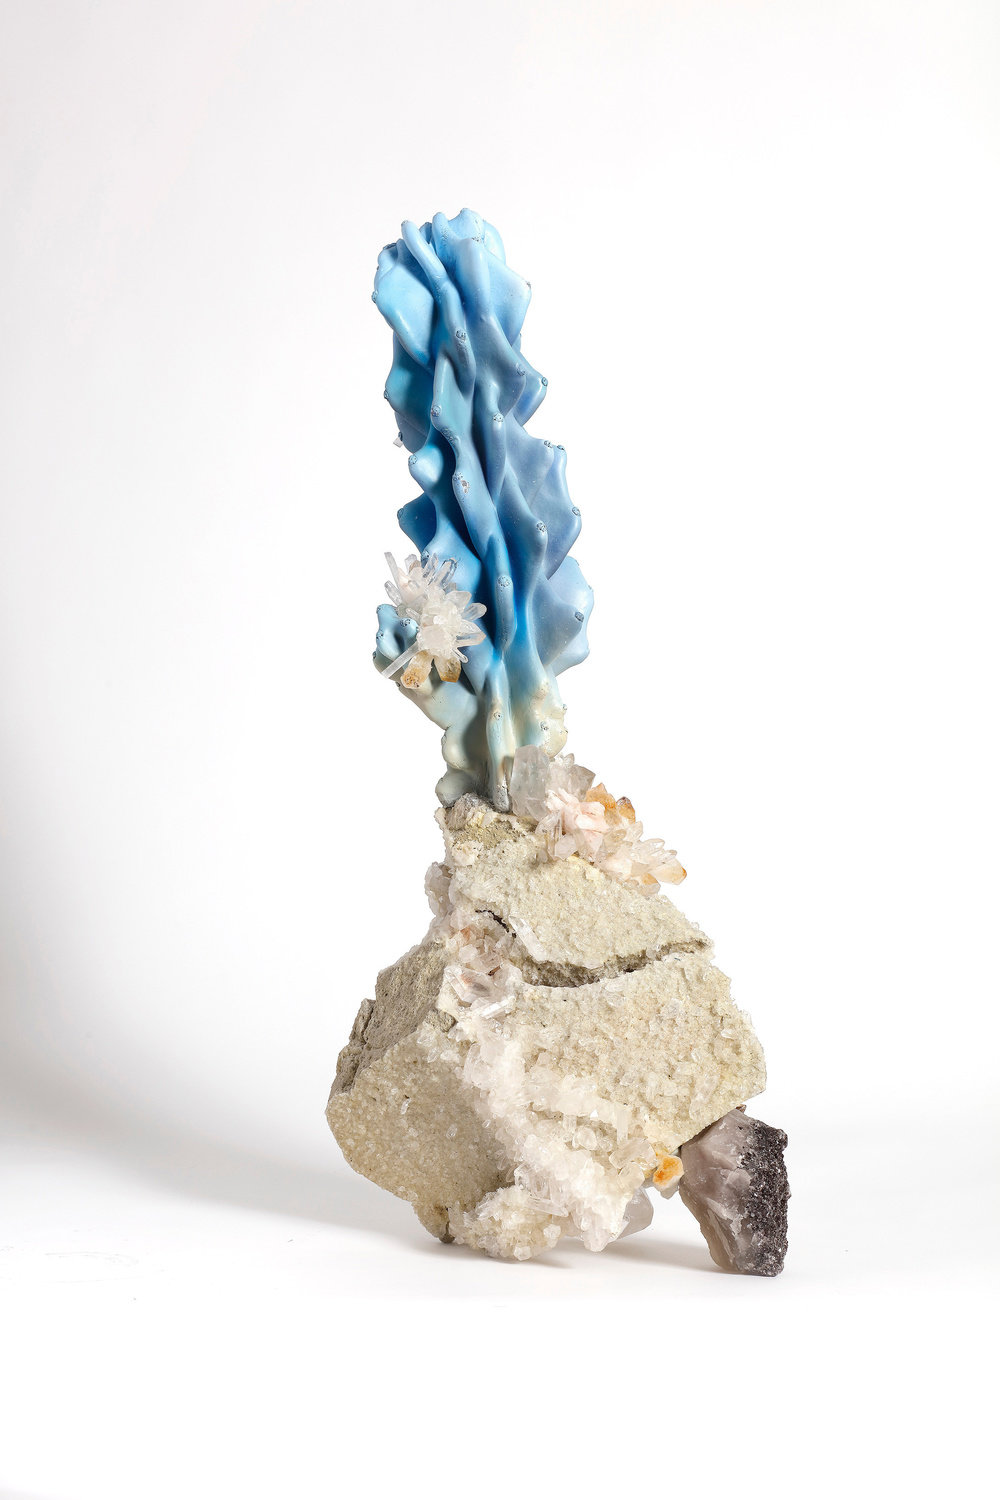 Freeman and lowe, blues for the data mine, 2019, cast resin, minerals, 24 3 8 x 11 1 4 x 6 1 4 in., 62 x 28.5 x 16 cm, 370513